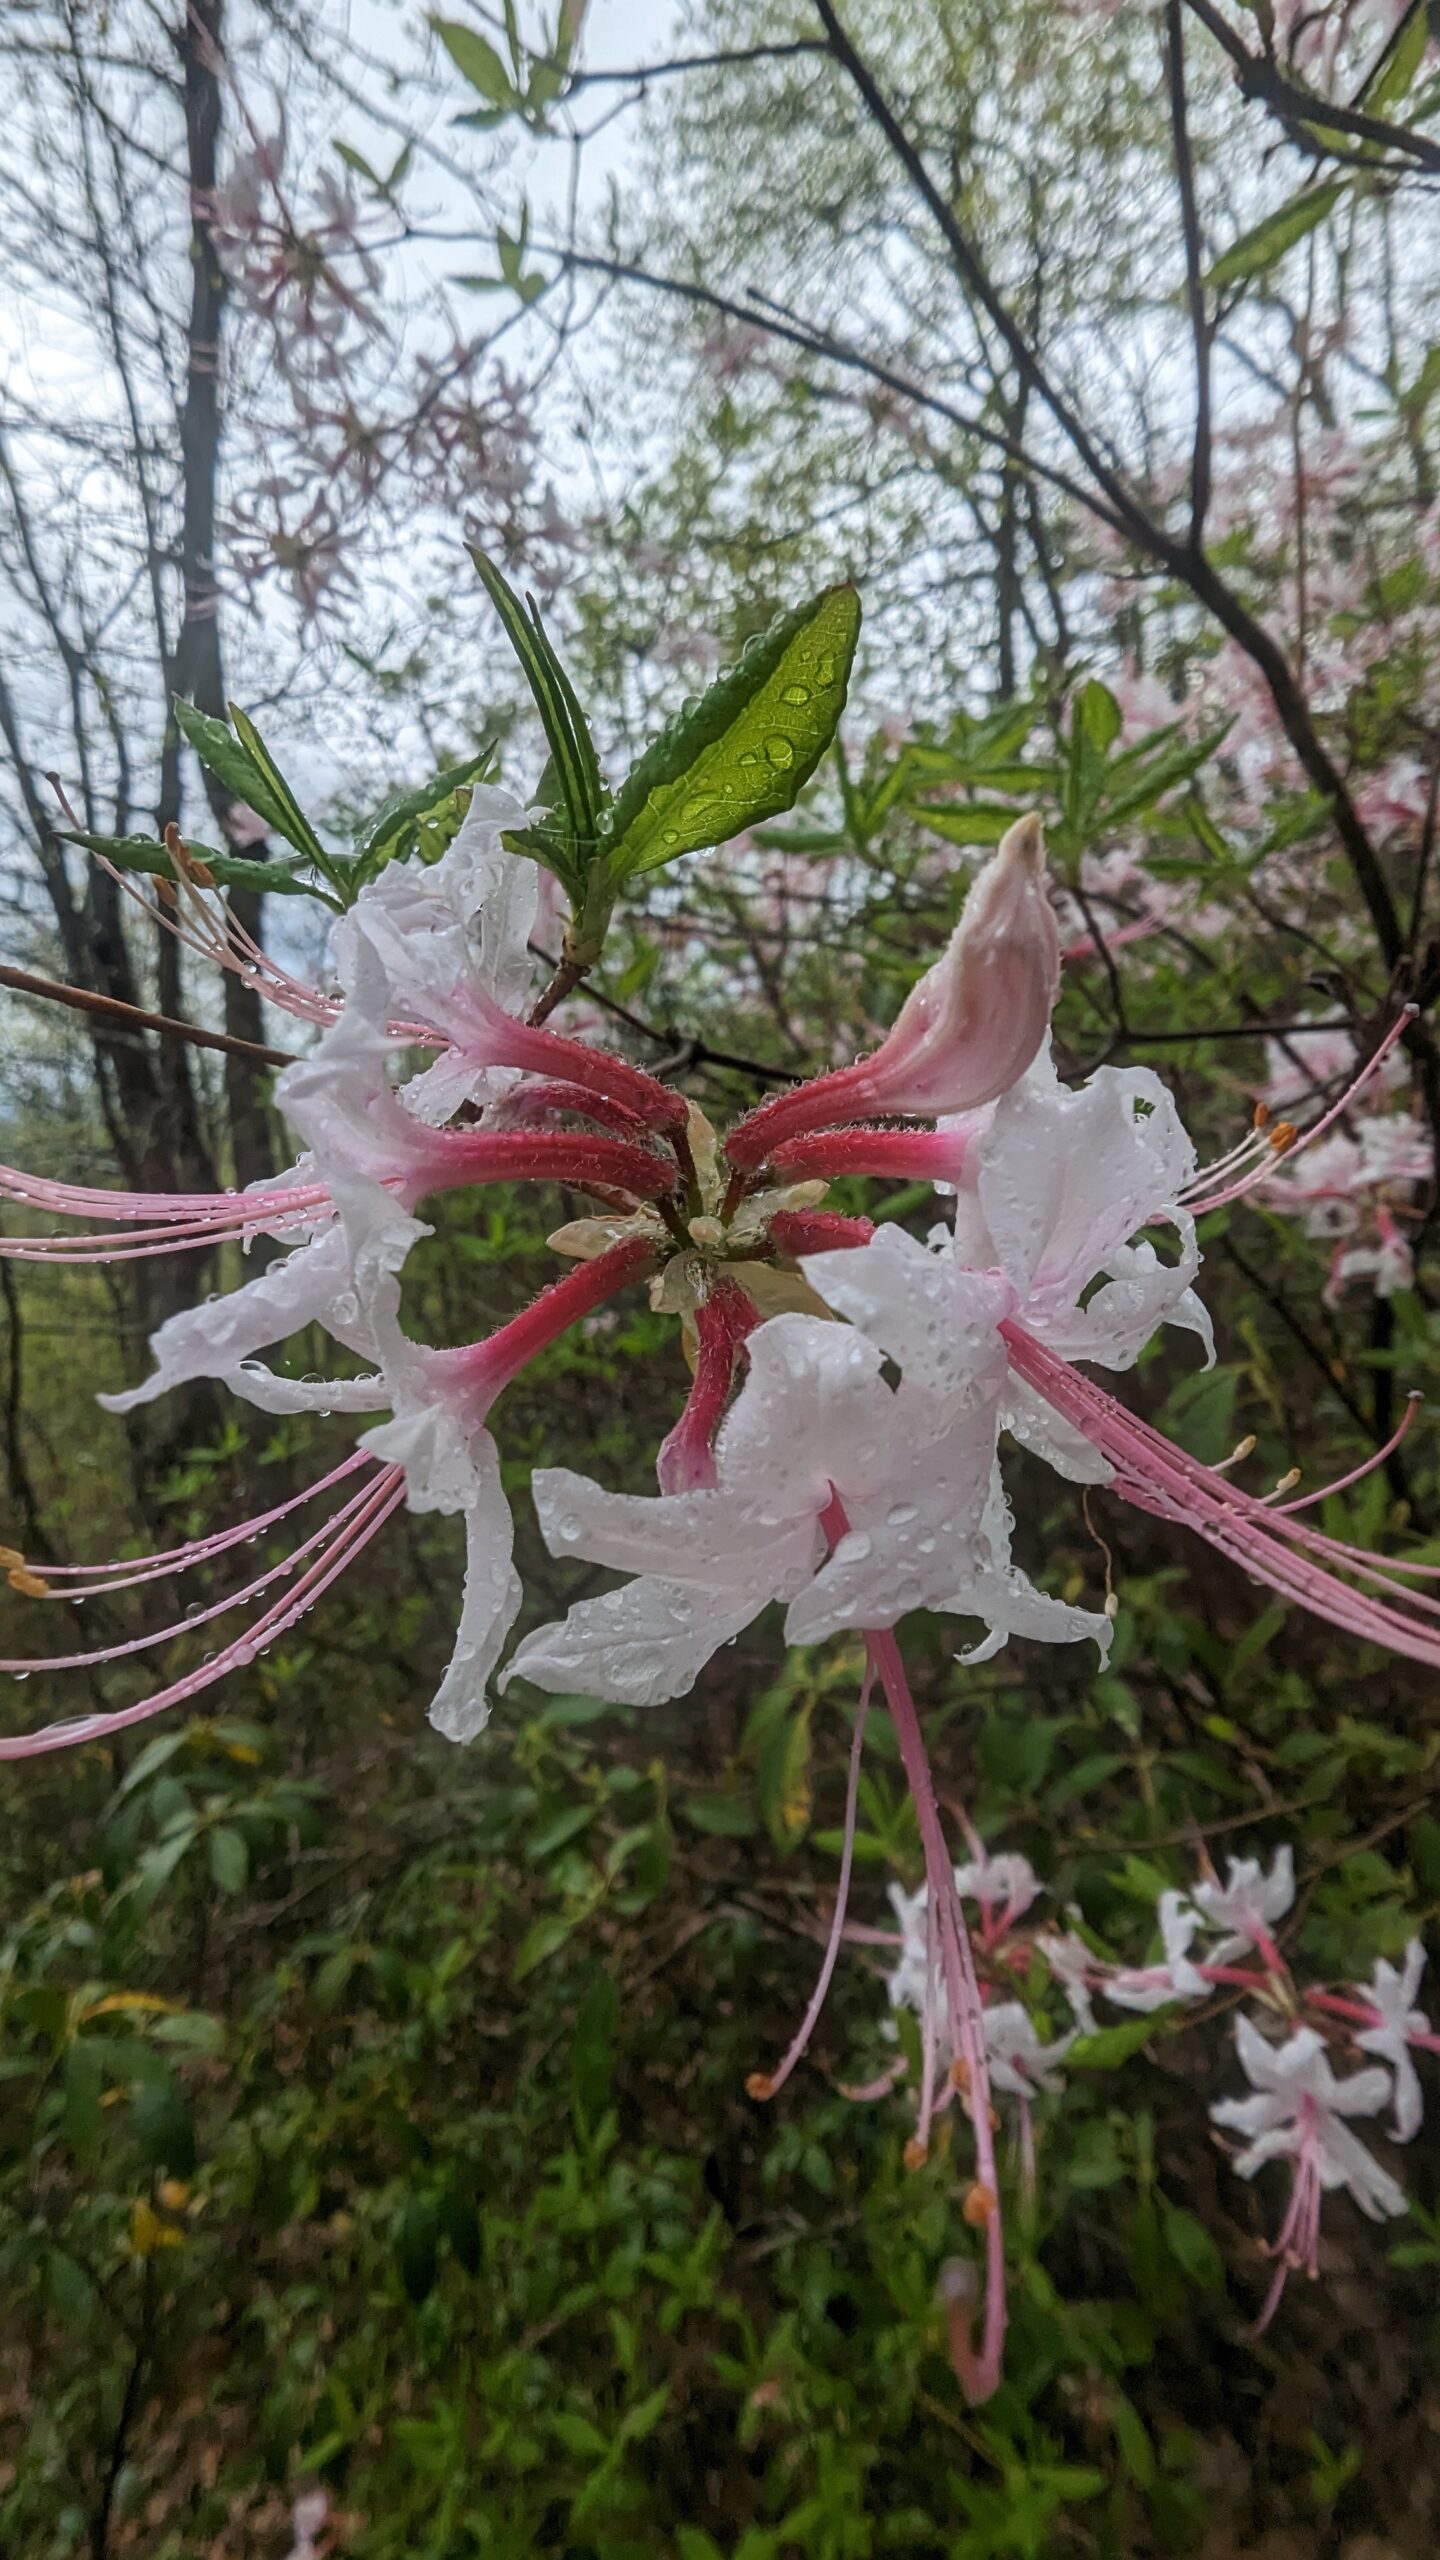 Rhododendron periclymenoides